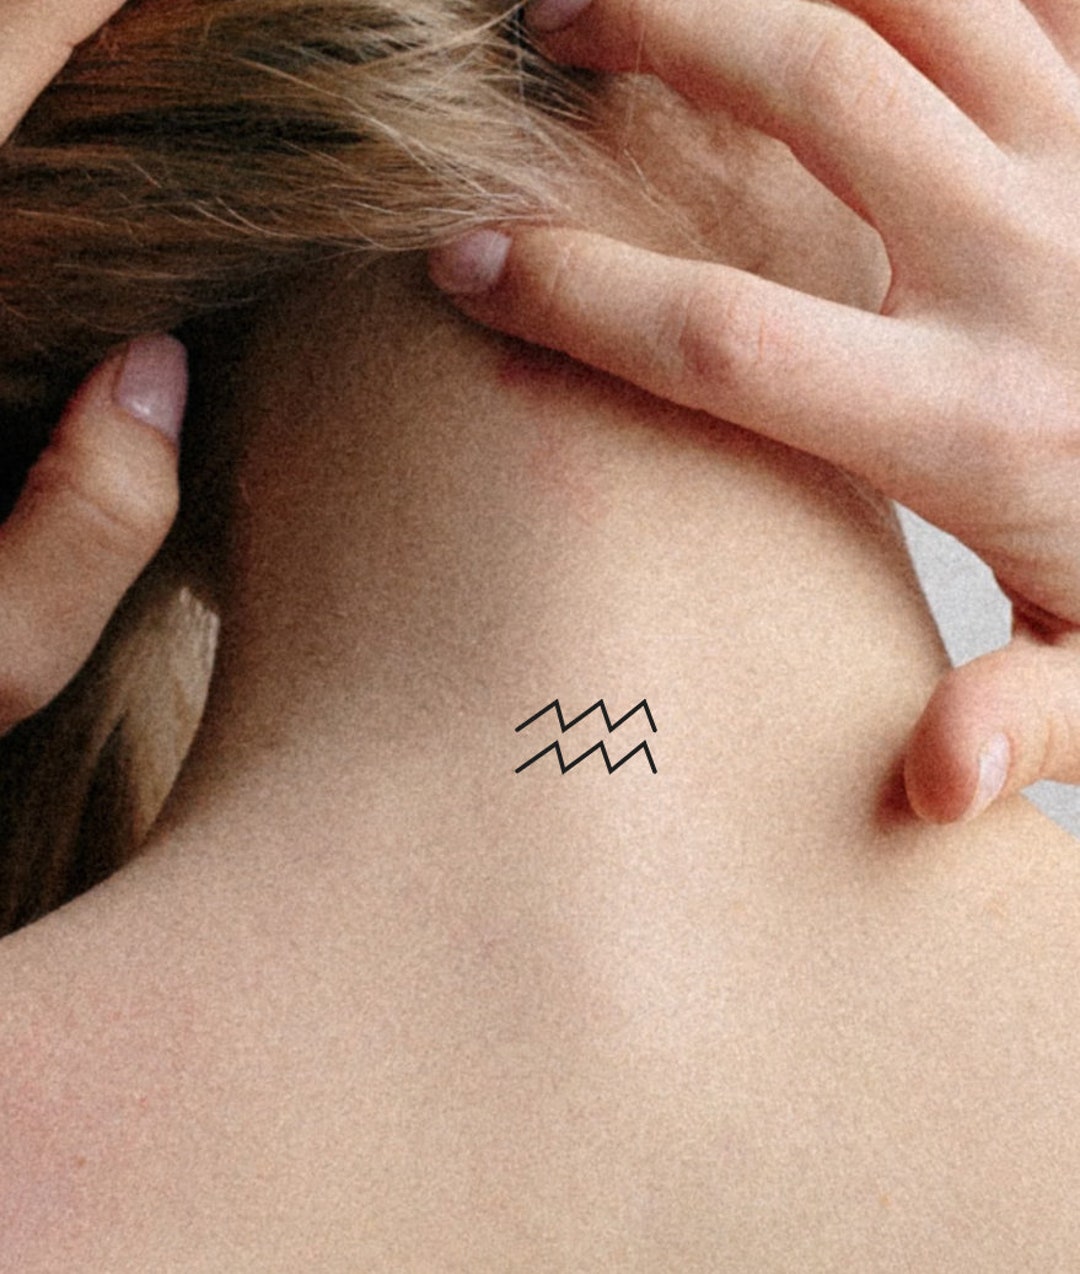 50 Zodiac Tattoos That Are Out of This World  CafeMomcom